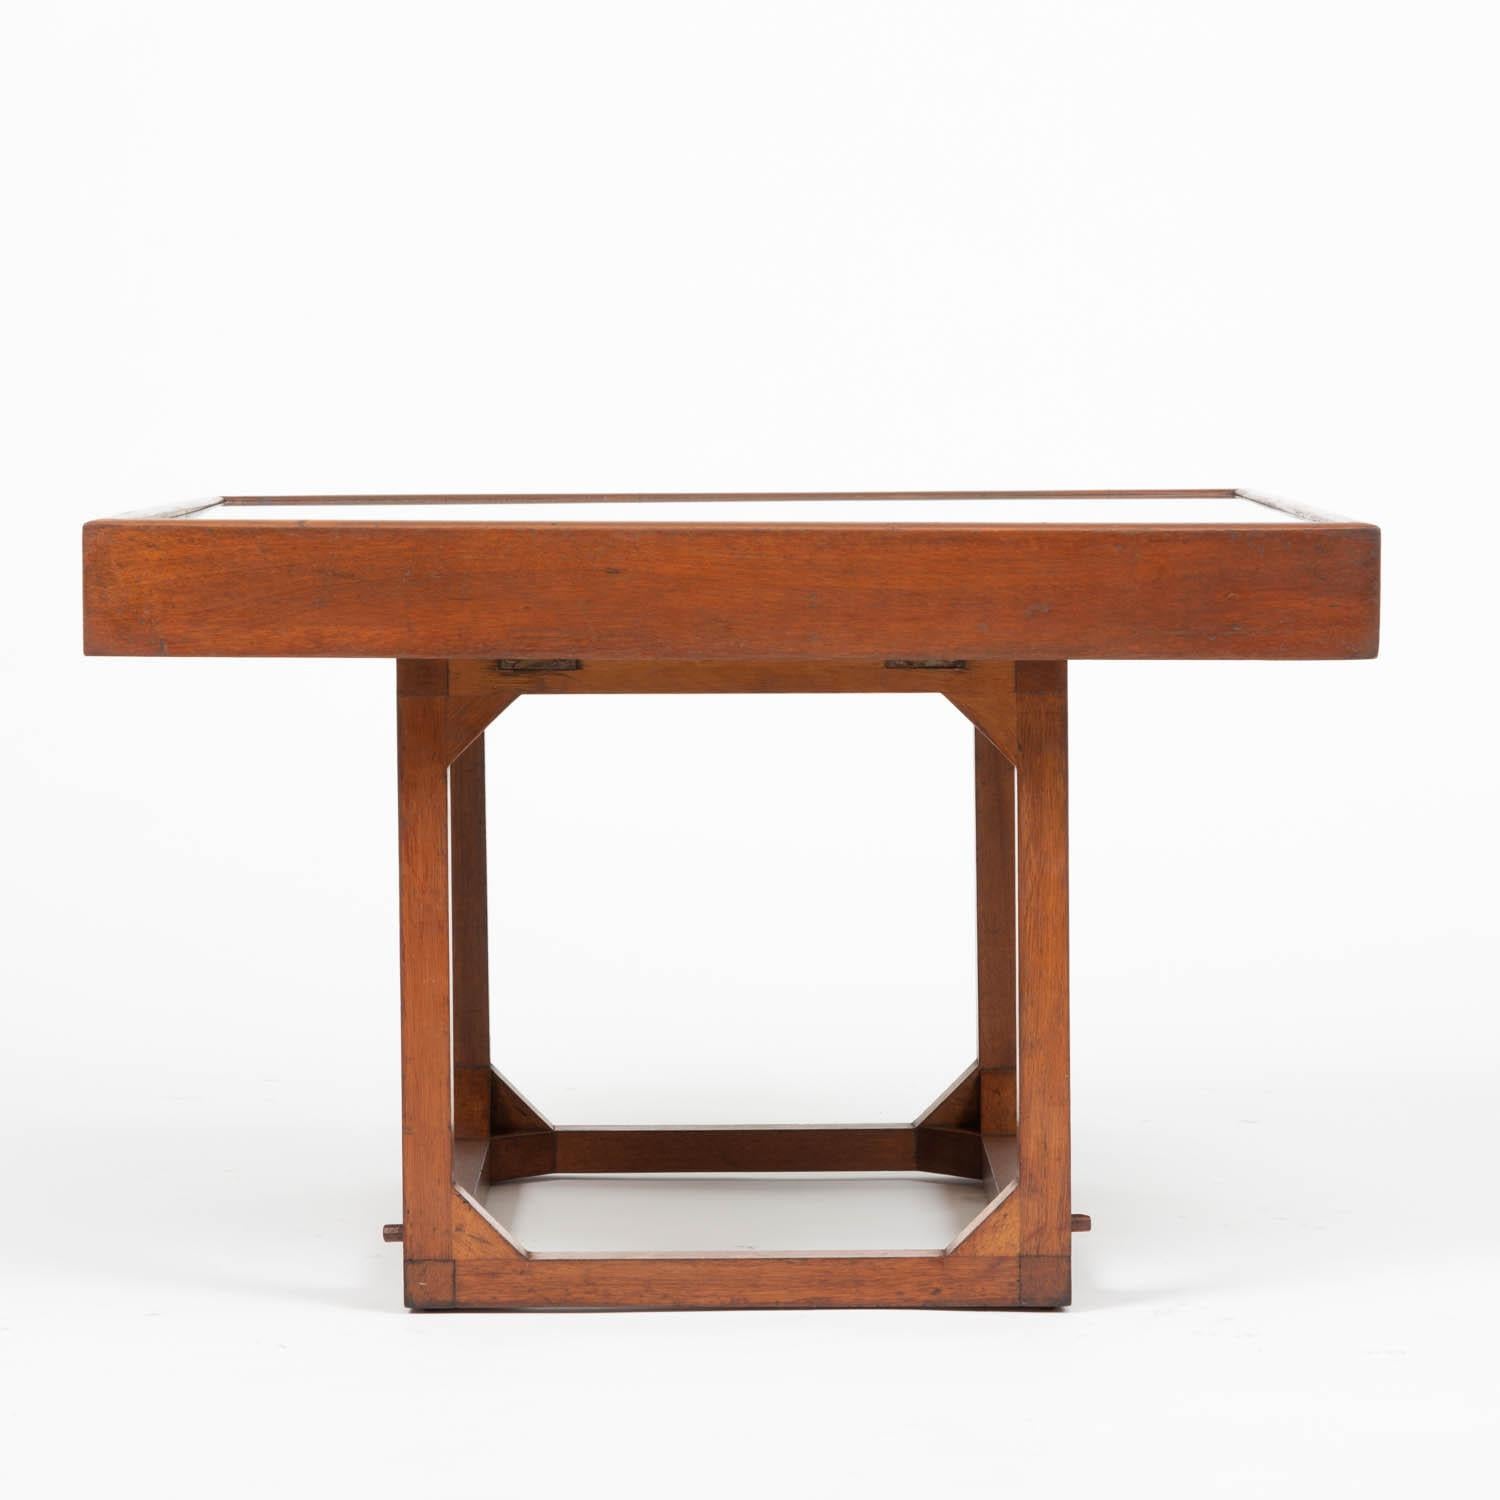 20th Century Mexican Modern Convertible Coffee/Dining Table by Michael van Beuren for Domus